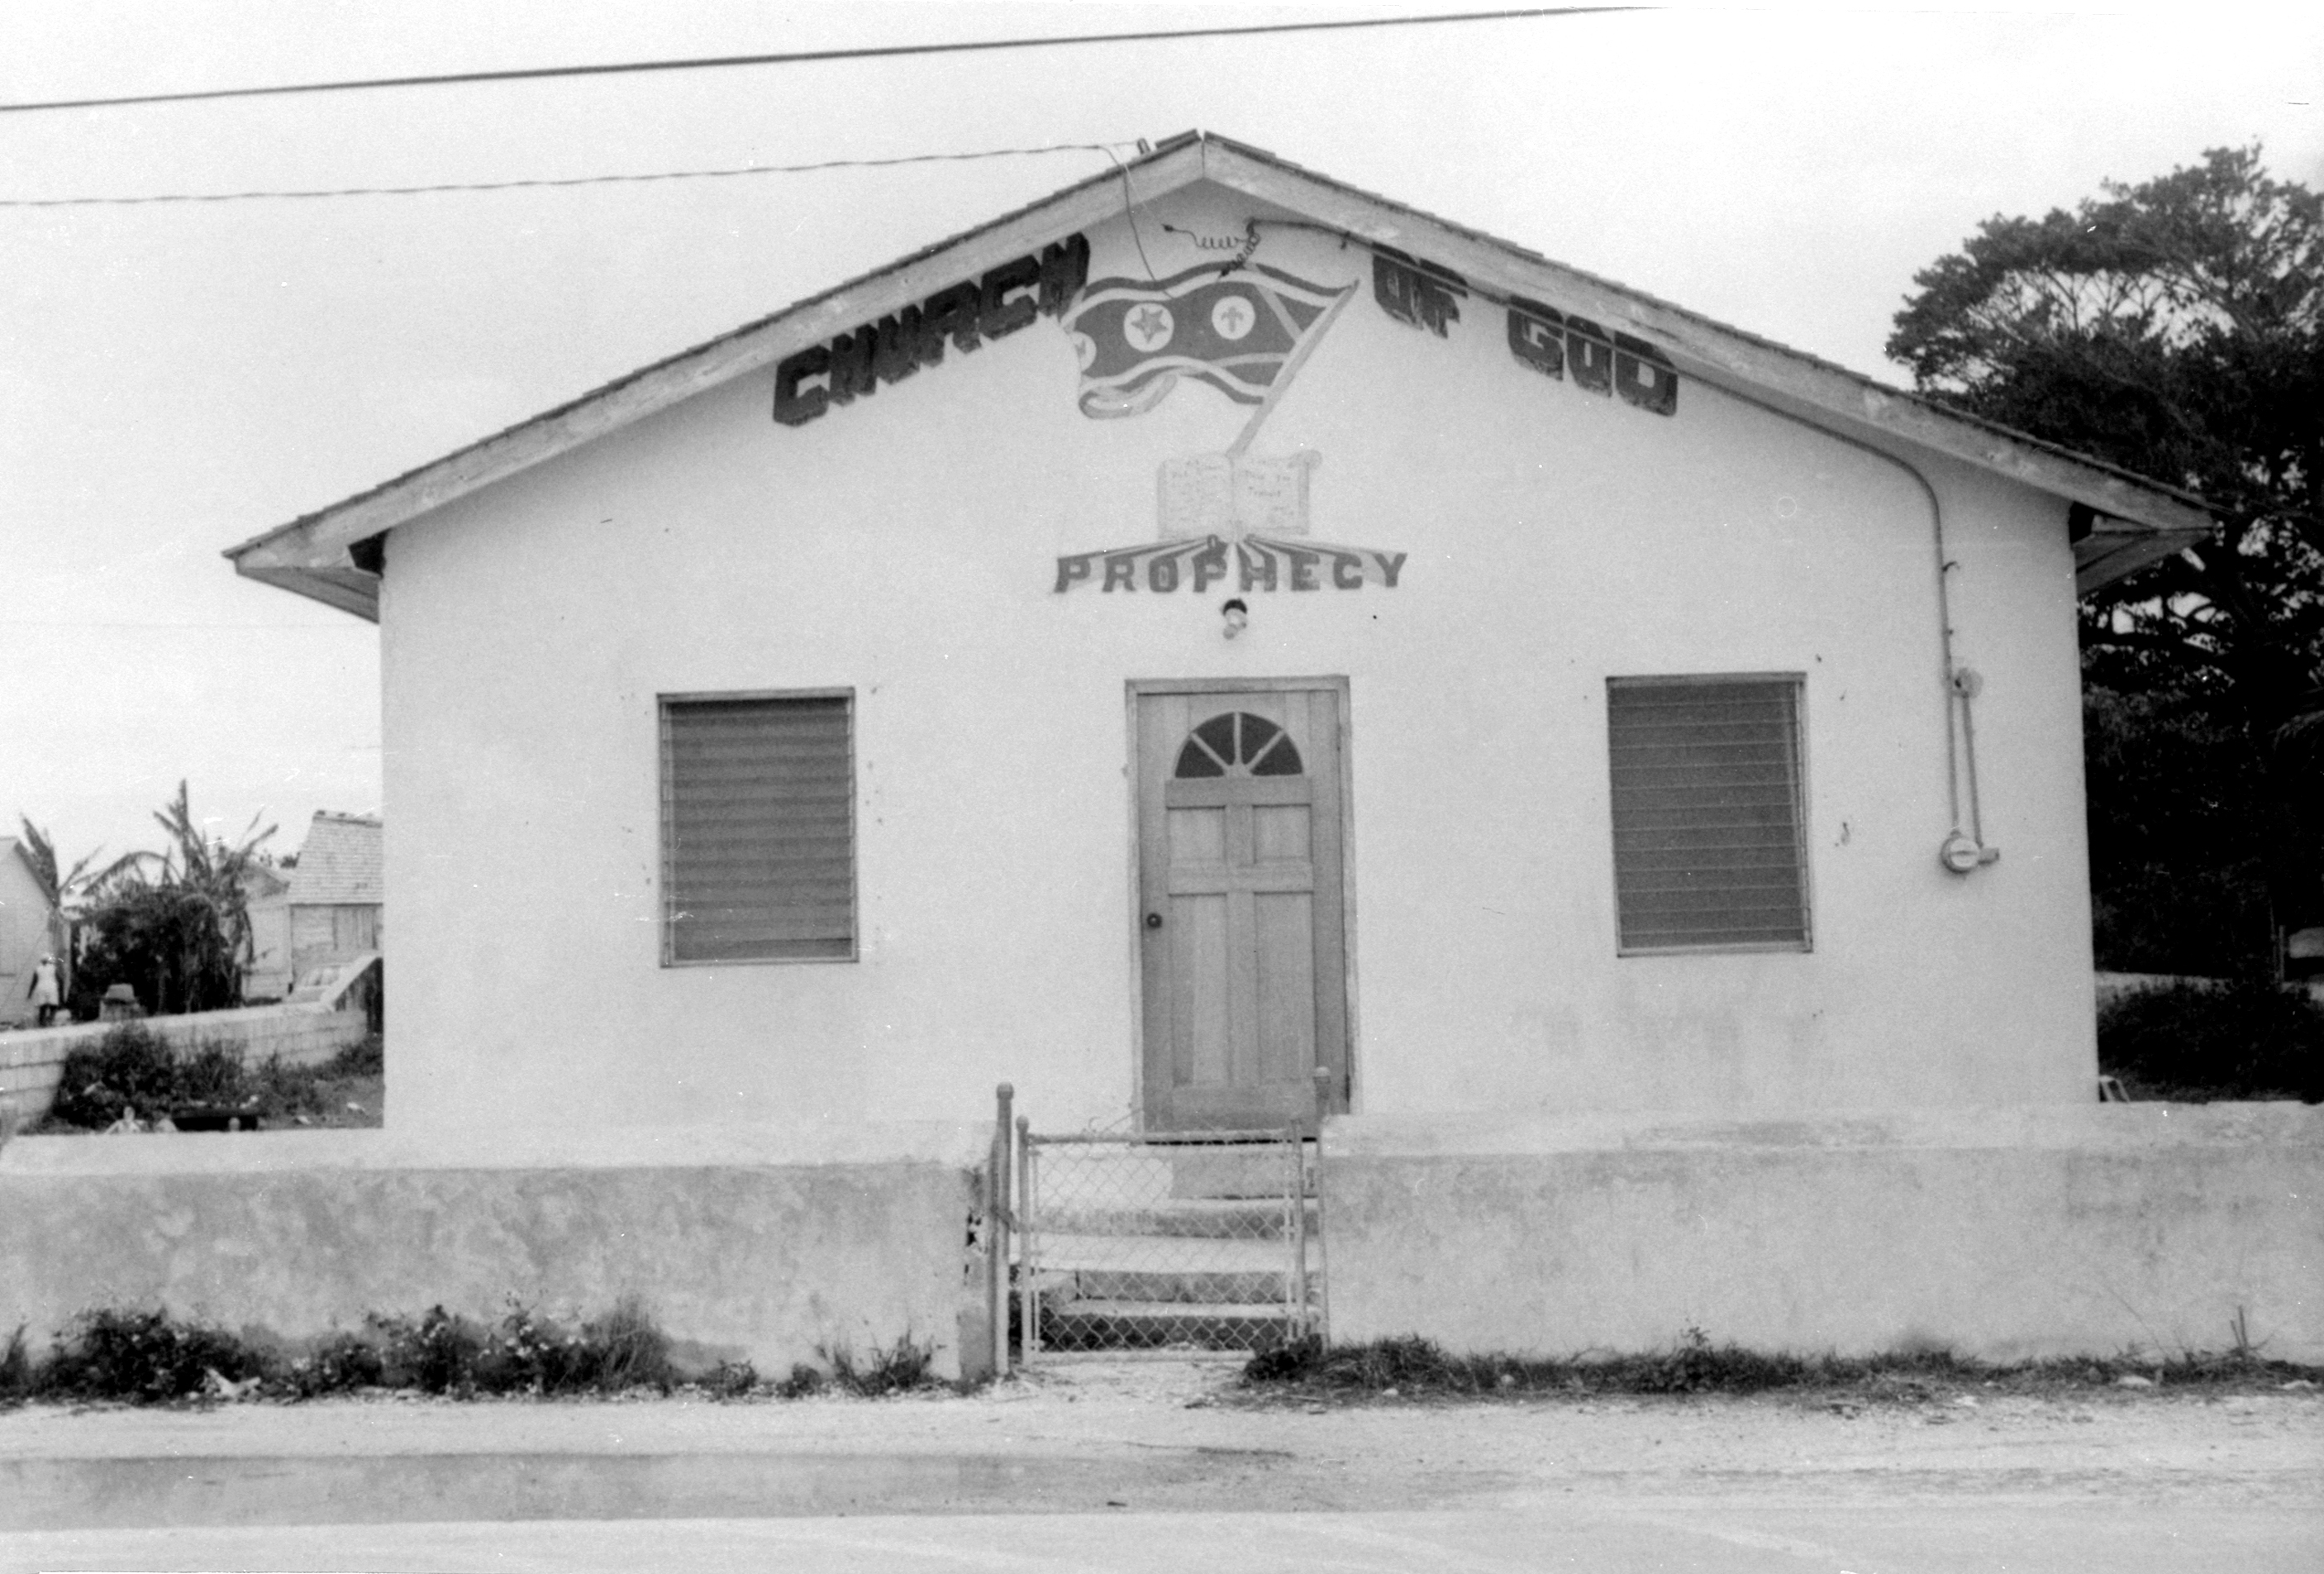 Church of God Prophecy, West End 1971